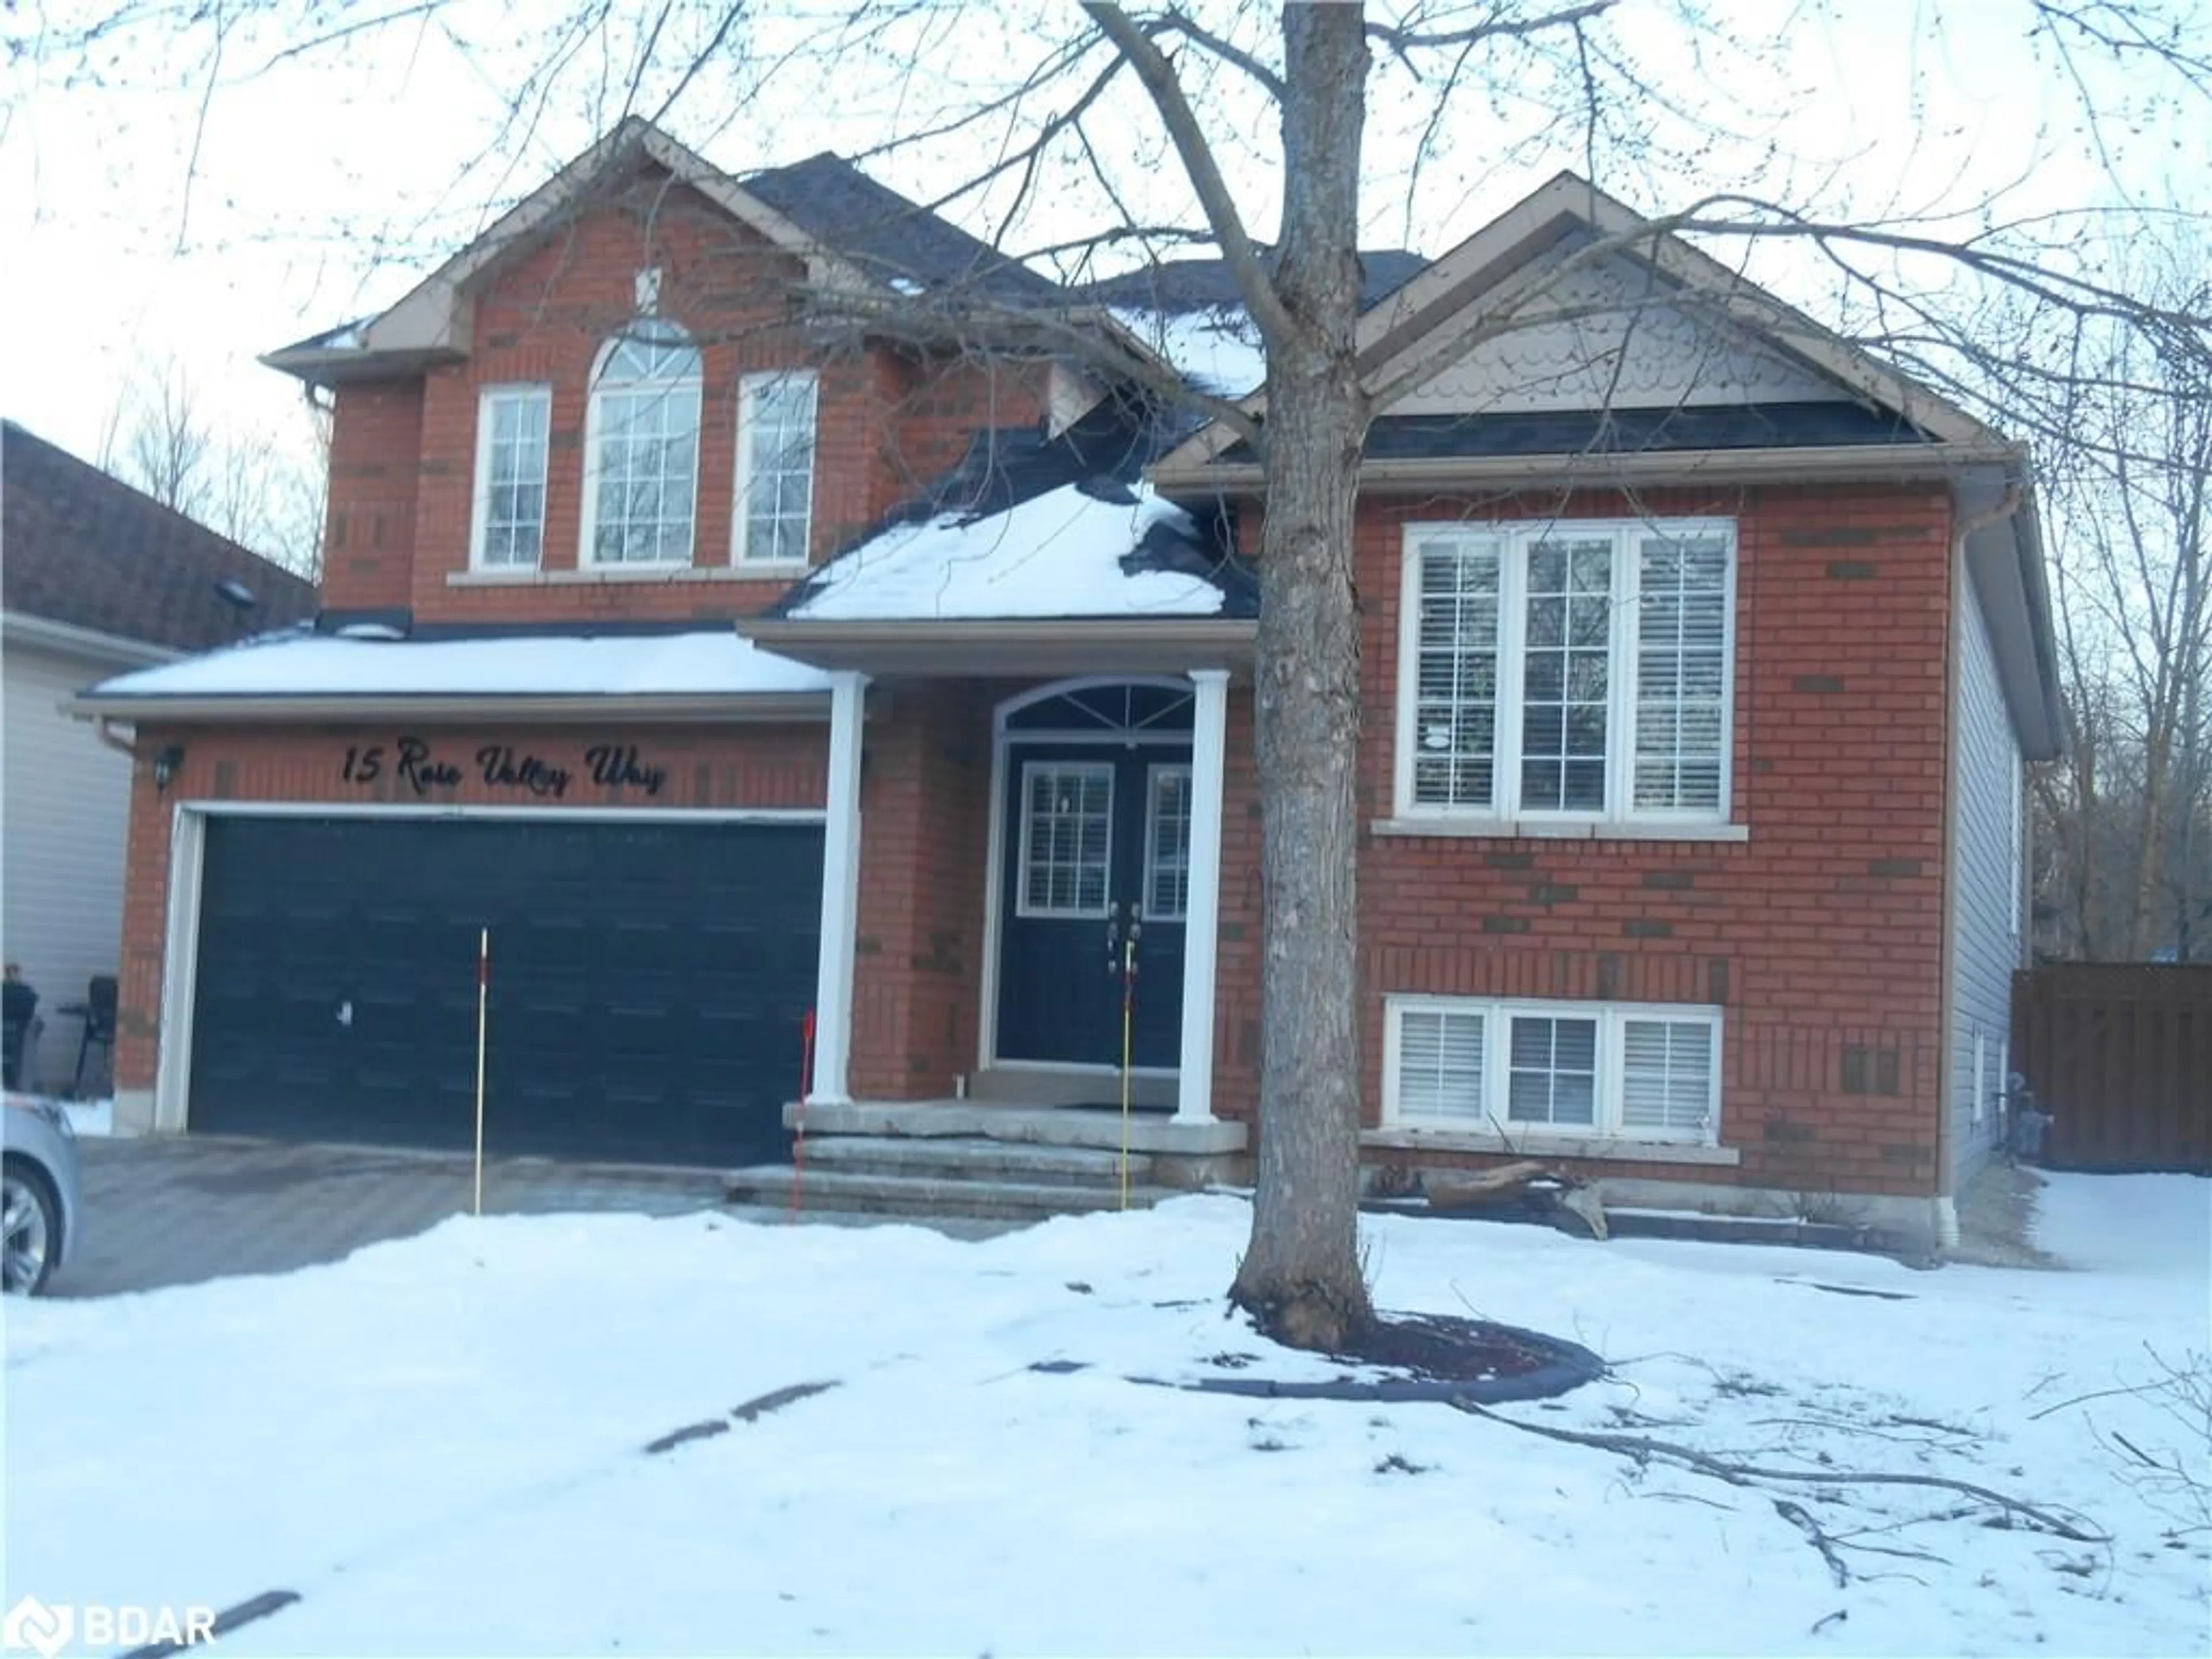 Home with brick exterior material for 15 Rose Valley Way, Wasaga Beach Ontario L9Z 3C5